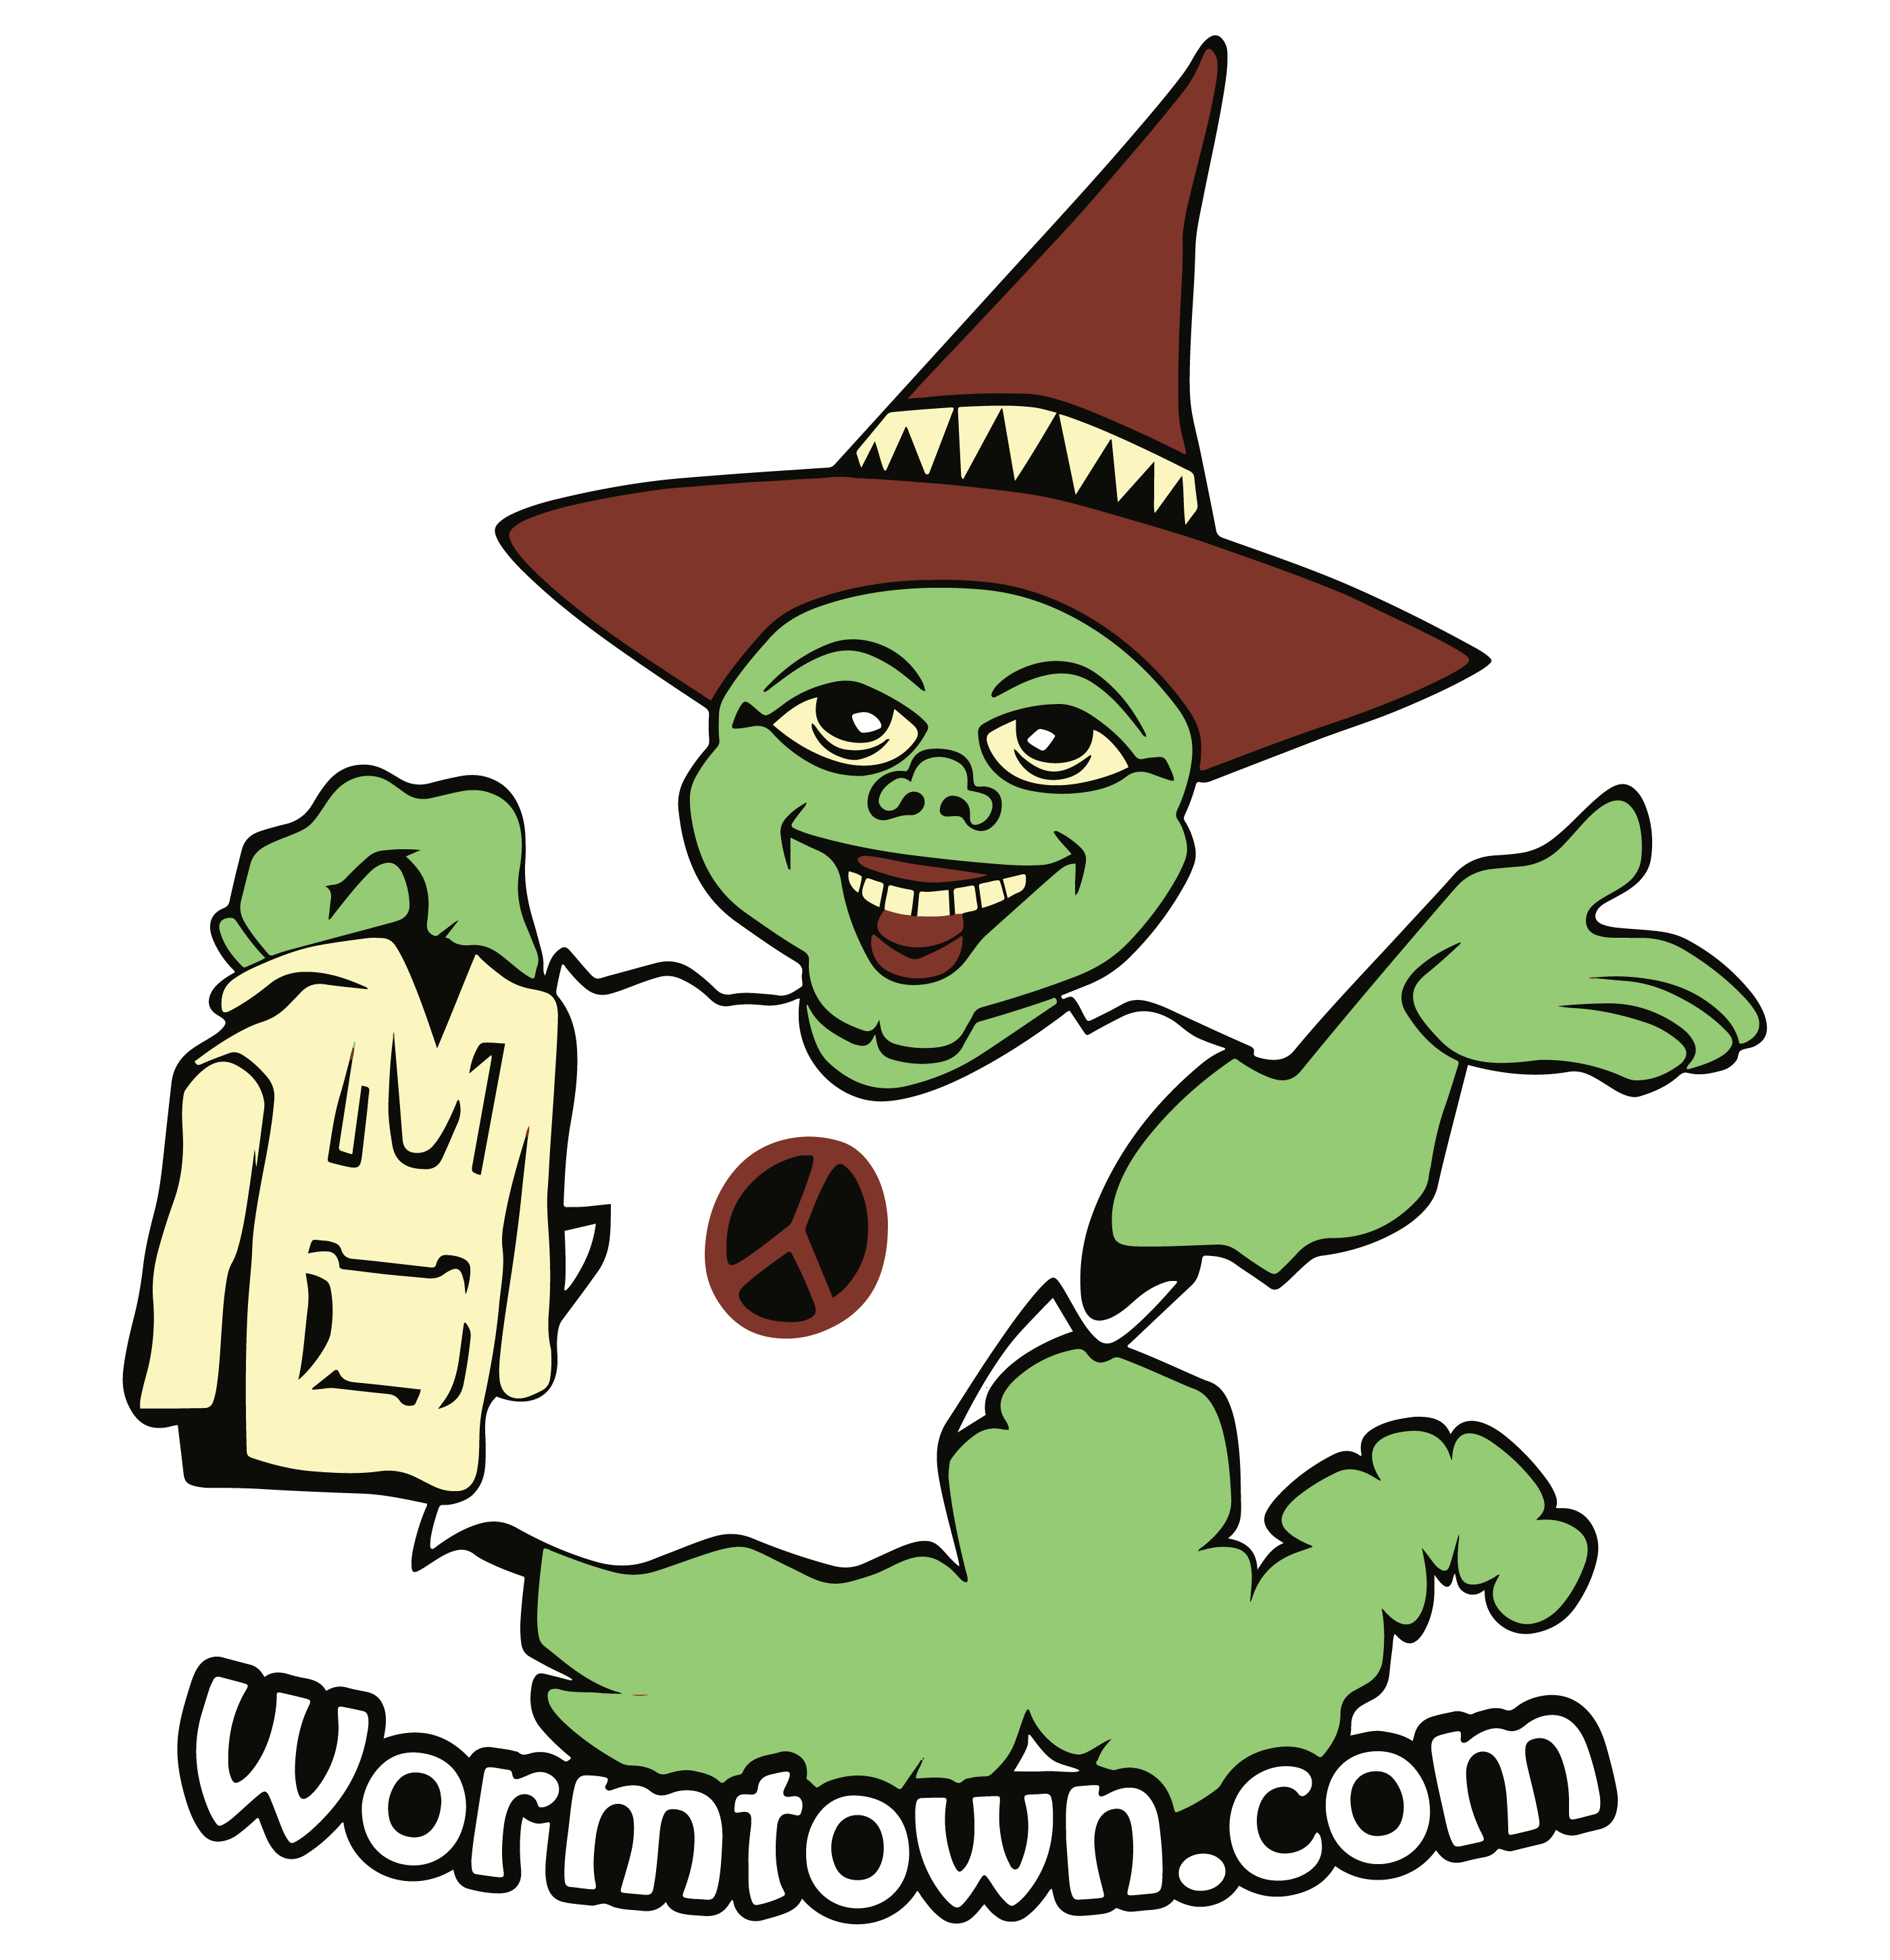 Wormtown Trading Company